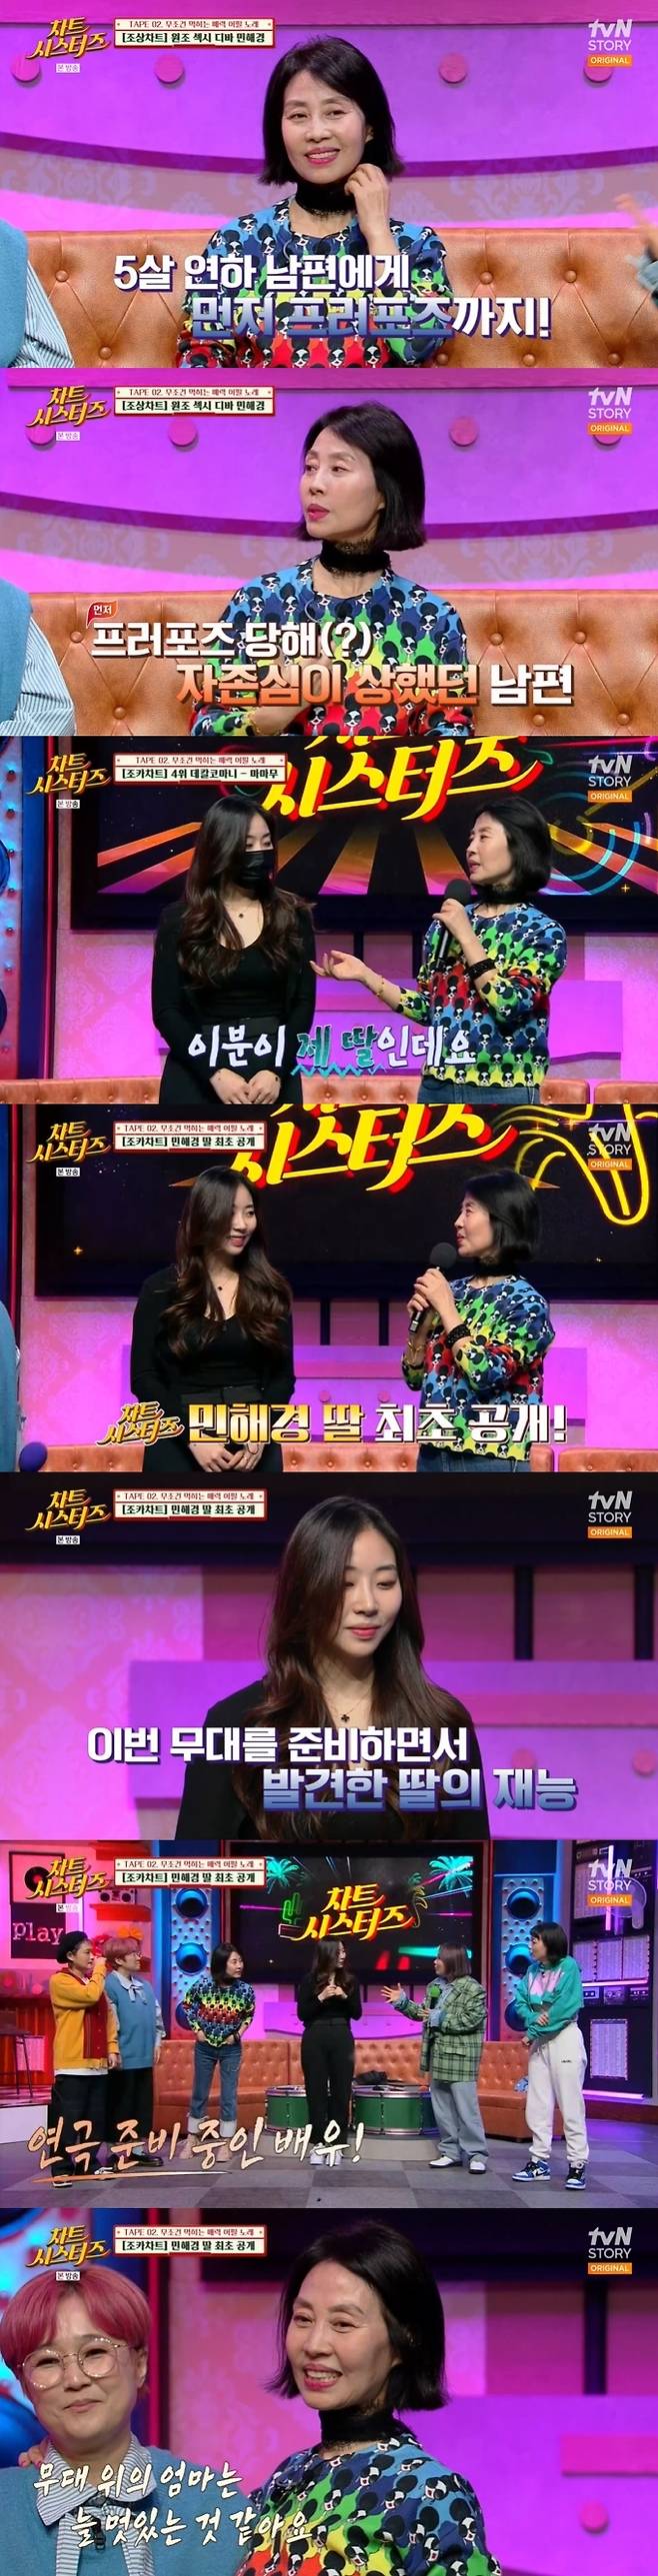 Singer Min Hae-kyung first unveiled her daughter who is preparing for the actor.On TVN STORY Chart Sisters, which aired on April 7, we looked at the chart rankings under the theme of Unconditional Attractive Appetite Songs.Shin Sung-woos Seosi on the fifth place of the aunt chart, Um Jung-hwas Invitation on the fourth, Seo Joo-kyungs Dumb Girl on the third, and Lee Seung-gis My Woman on the second.Kim Shin-Young said, When Lee Seung-gi first came out, he had a good face and a student chairman Feelings.The sister of the people was Moon Geun Young, and the younger brother of the people was Lee Seung-gi. This song was not released, it was a super-luxury cast, one female character, Ahn Young Mi said, introducing Song Eun-yis Imagination music video.At that time, 28-year-old Song Eun-yi, along with Ahn Jae-wook, Jung Sung-hwa, Kim Jin-soo, Shin Dong-yeop and other music videos appeared in the youthful appearance of Seoul Yedae Play and alumni.Shin Bong-sun, who watched the video, said, I was tearful to see this, so cute girl, and Song Eun-yi took off his shoes and burst.In the top spot, Jang Na-ras I am a woman came up.Celeb Five said, Now IU Feelings, and admired the beauty of Jang Na-ra, who is not old at all over the years.On the fifth place on the ancestral chart, Jung Su-ras I to You and Jeon Young-roks Paperology came up in fourth place. Kim Shin-Young said, I used to attend the cathedral.I gave my brother a paper science, he confessed, and he was given a paper science to his brother, who was a member of the Won-Buddhist Court of Justice.Shin Bong-sun laughed, pointing out that the law enforcement brother takes 100% of the mother to have no answer, because of the smell of fragrance.Following the third-placed mind and bodys Only You, Jang Hye-ris The Love You Left for Me came in second place.Min Hae-kyungs facial face to see came up in the top spot, and Min Hae-kyung, the original song, appeared in the studio and showed the stage.One 43-year-old singer, Min Hae-kyung, boasted a unique fashion sense that won the Best Dresser Award for the fifth consecutive year.Min Hae-kyung, who still styles himself to the present, introduced the lingerie look for the first time in the past.When the music video for Miniscutt, released in 1991, was released, Min Hae-kyung boasted that he was still wearing that dress, it still fits.When Shin Bong-sun was worried about the strict social atmosphere at the time, Min Hae-kyung said, The station was in a hurry.When I rehearsed, I was covered and dressed beautifully and released it at the time of the broadcast. Min Hae-kyung also revealed the story of his proposal to his husband, who was five years younger, saying, I just want to get married because I have not been in a month.My husband was hurt by his pride and disappeared the next day. I had an appointment, but he did not show up. The phone called that night.When I was going to America, I thought about it for a month and asked if I thought it was right. I felt the same.We got married in less than 10 months. Following Winners REALLY REALLY, which ranks fifth on the niece chart, Mamamus Decalcomani, which was selected by Min Hae-kyung, rose to fourth place.Min Hae-kyung even danced with a female dancer who covered her face and sang Decalcomani.When Kim Shin-Young praised the choreographer and the breathing fit well, Min Hae-kyung introduced the fact is that this is my daughter.Min Hae-kyung released her daughter Yubin Lee for the first time on the air: Shin Bong-sun and Ahn Young Mi said, The appearance is not unusual.My eyes look like my mother. Yubin Lee mastered the dance by herself and taught her mother Min Hae-kyung to dance.Yubin Lee said he is currently preparing for Play. Yubin Lee said, I am preparing hard. I am trying.Im learning a lot, he said, and when Im on stage, my mother seems to be more amazing, and my mother on stage always seems to be cool.Lovelies Achu in third place, Infinites Lets do it in second place, and IUs Good Day in first place.Celeb Five introduced the three-stage treble and the charm of Aiku, which is a song point, and Min Hae-kyung also digested Aiku in his own color.